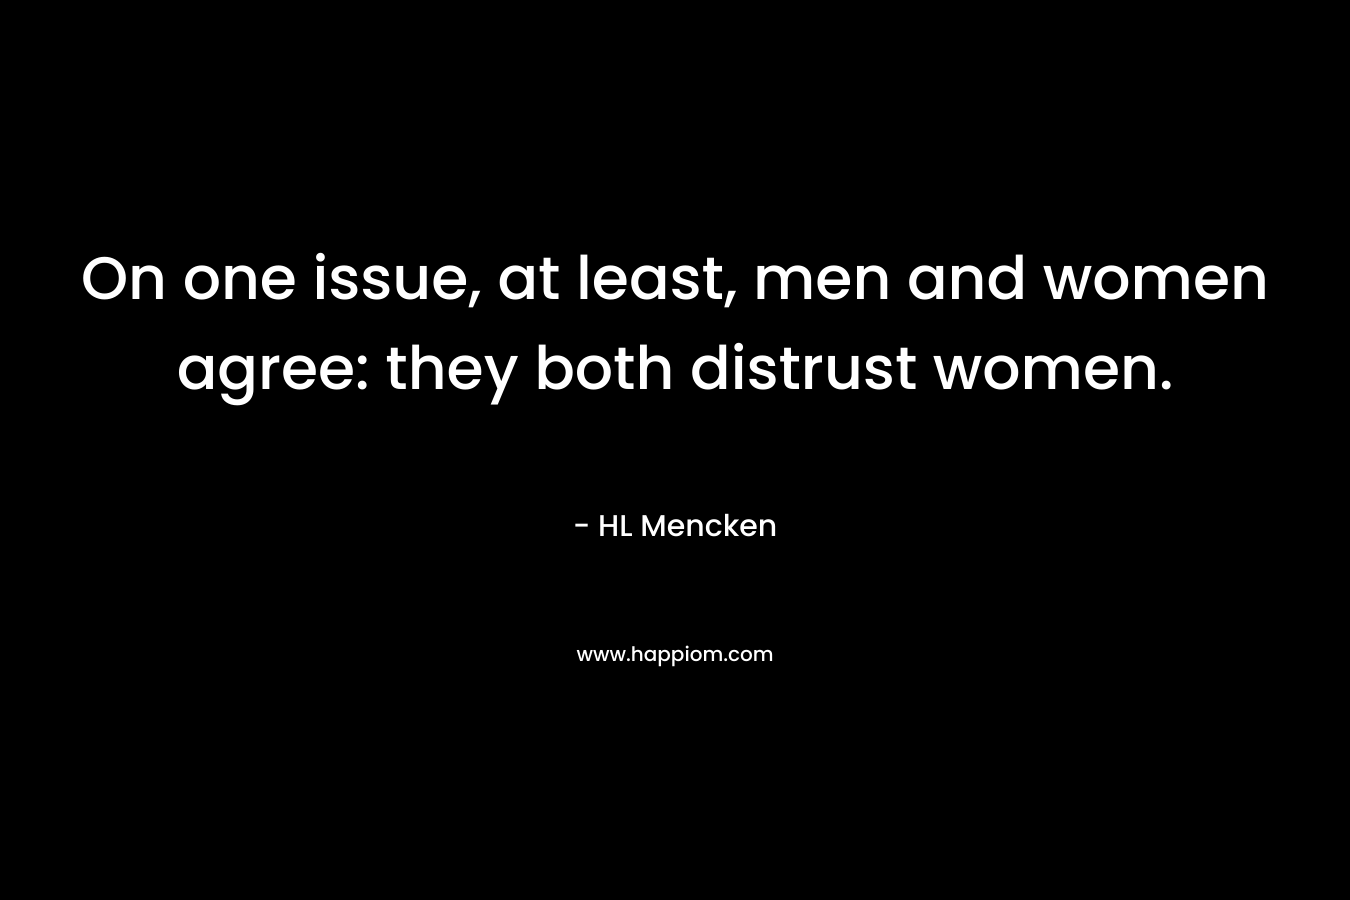 On one issue, at least, men and women agree: they both distrust women.